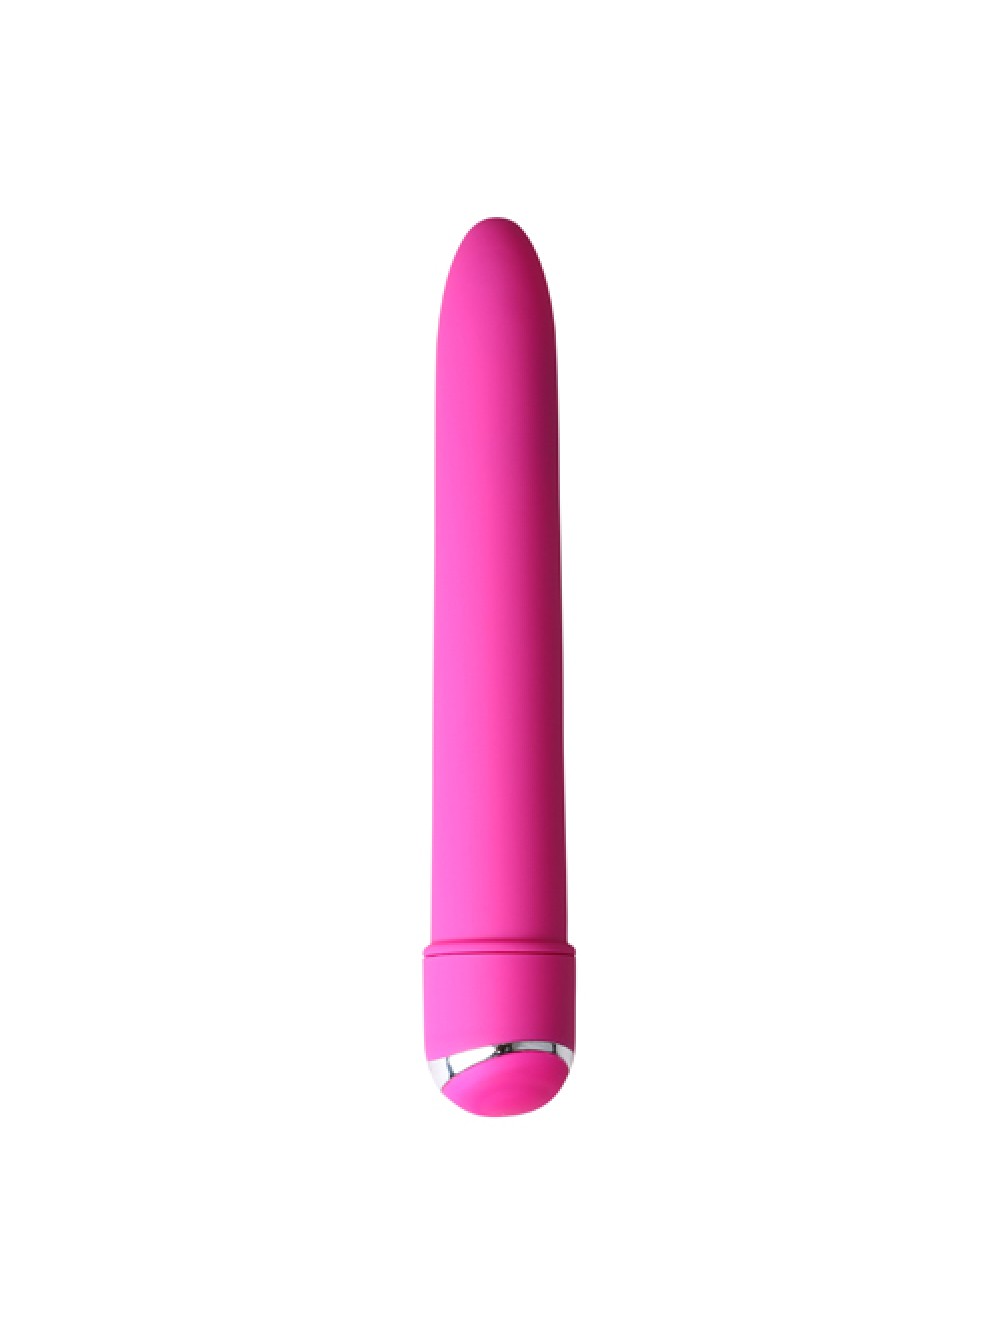 7 Function Classic Chic 6 Inch Vibe in Pink 716770057808